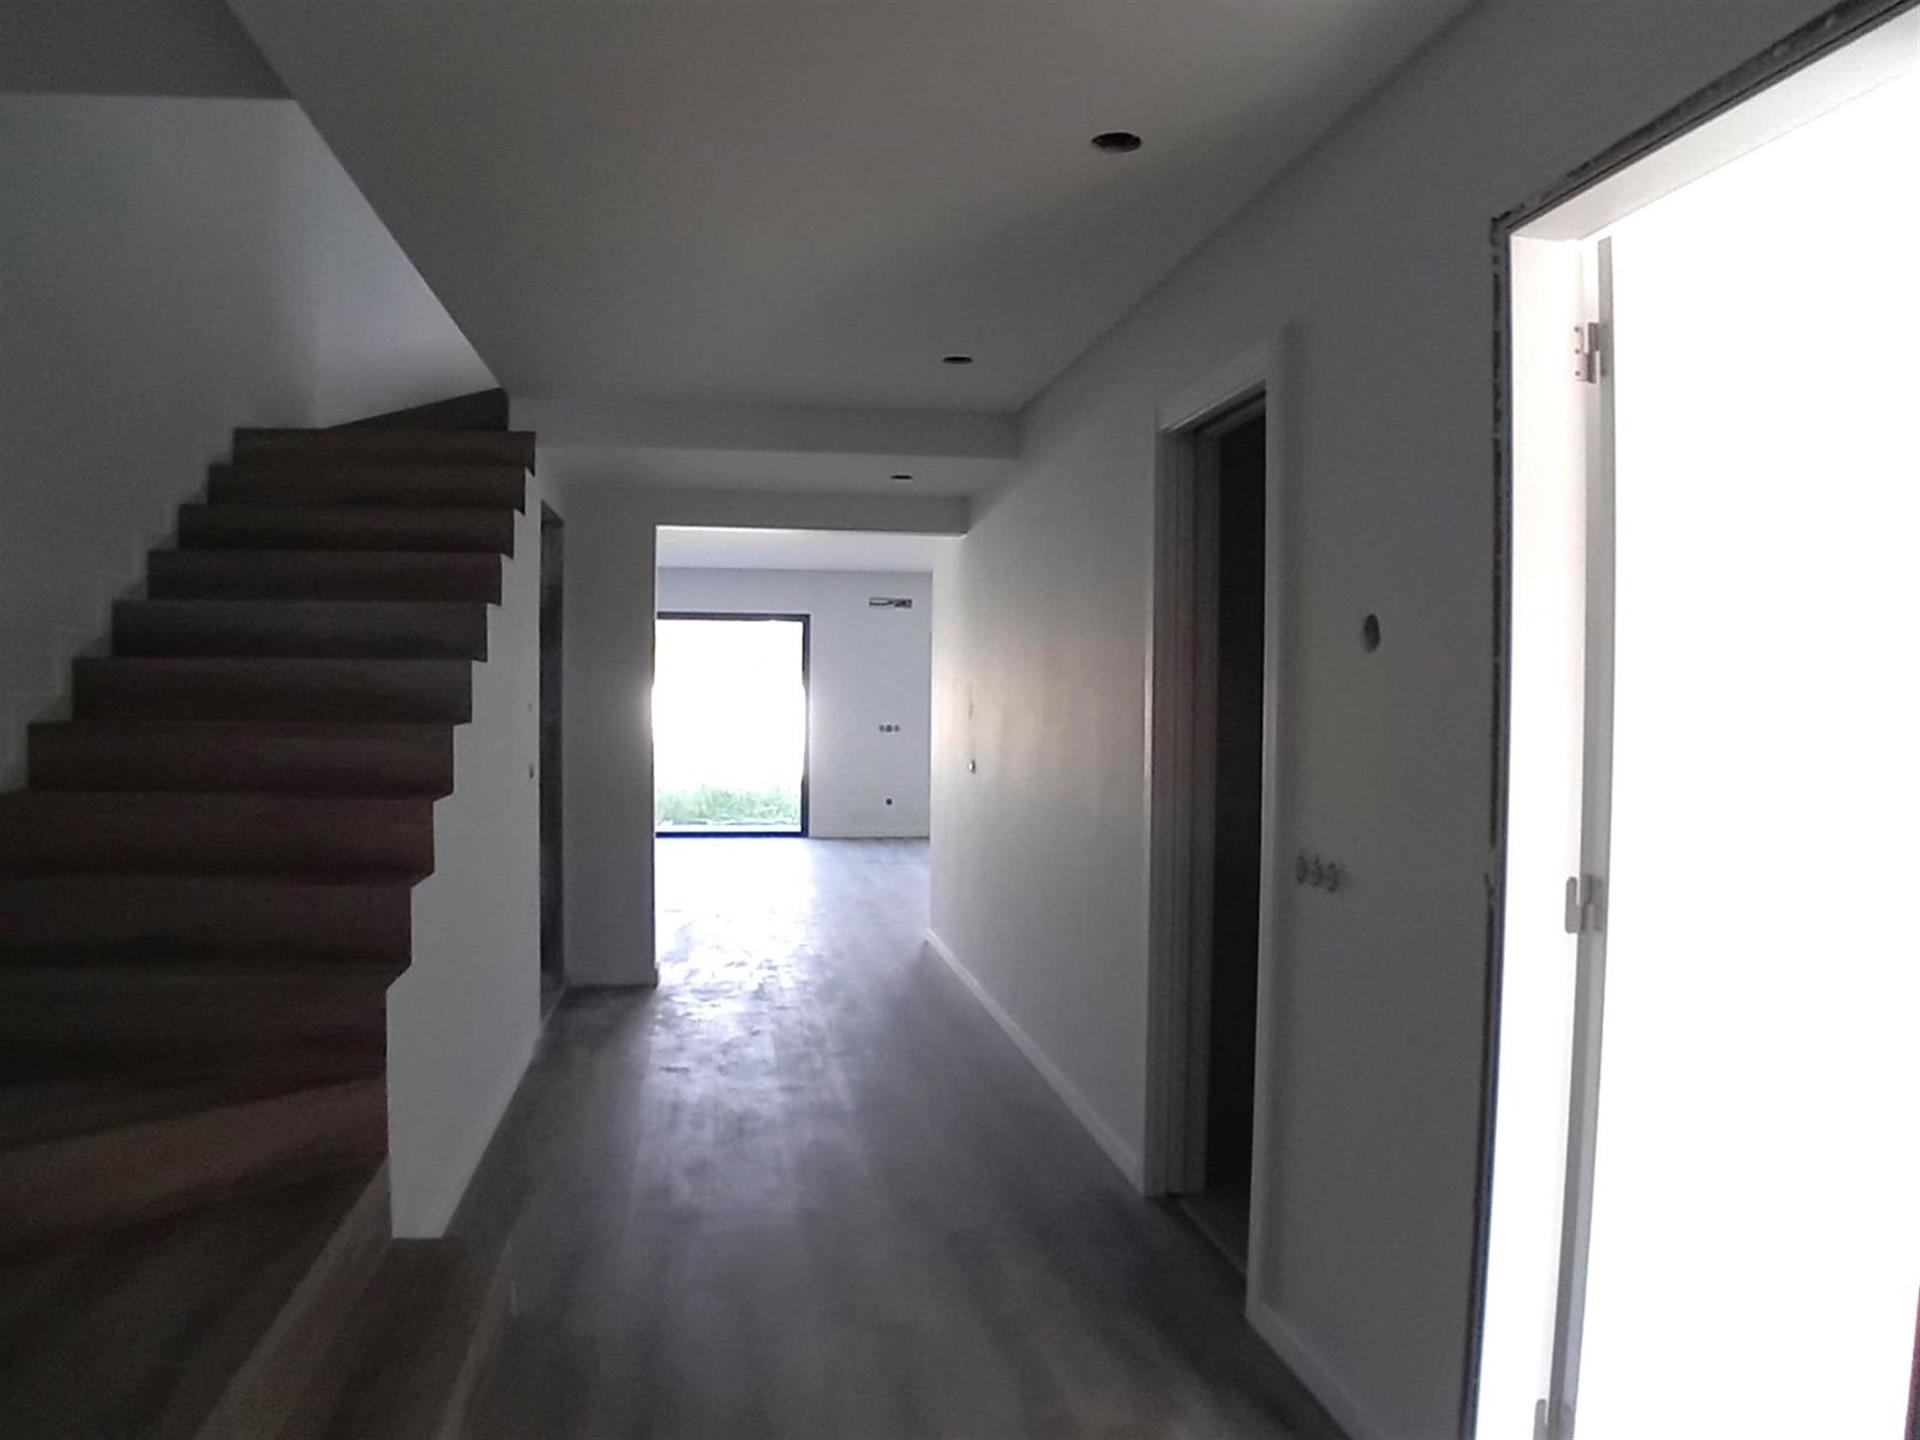 Contemporary 4 bedroom townhouse just a few minutes from Leiria